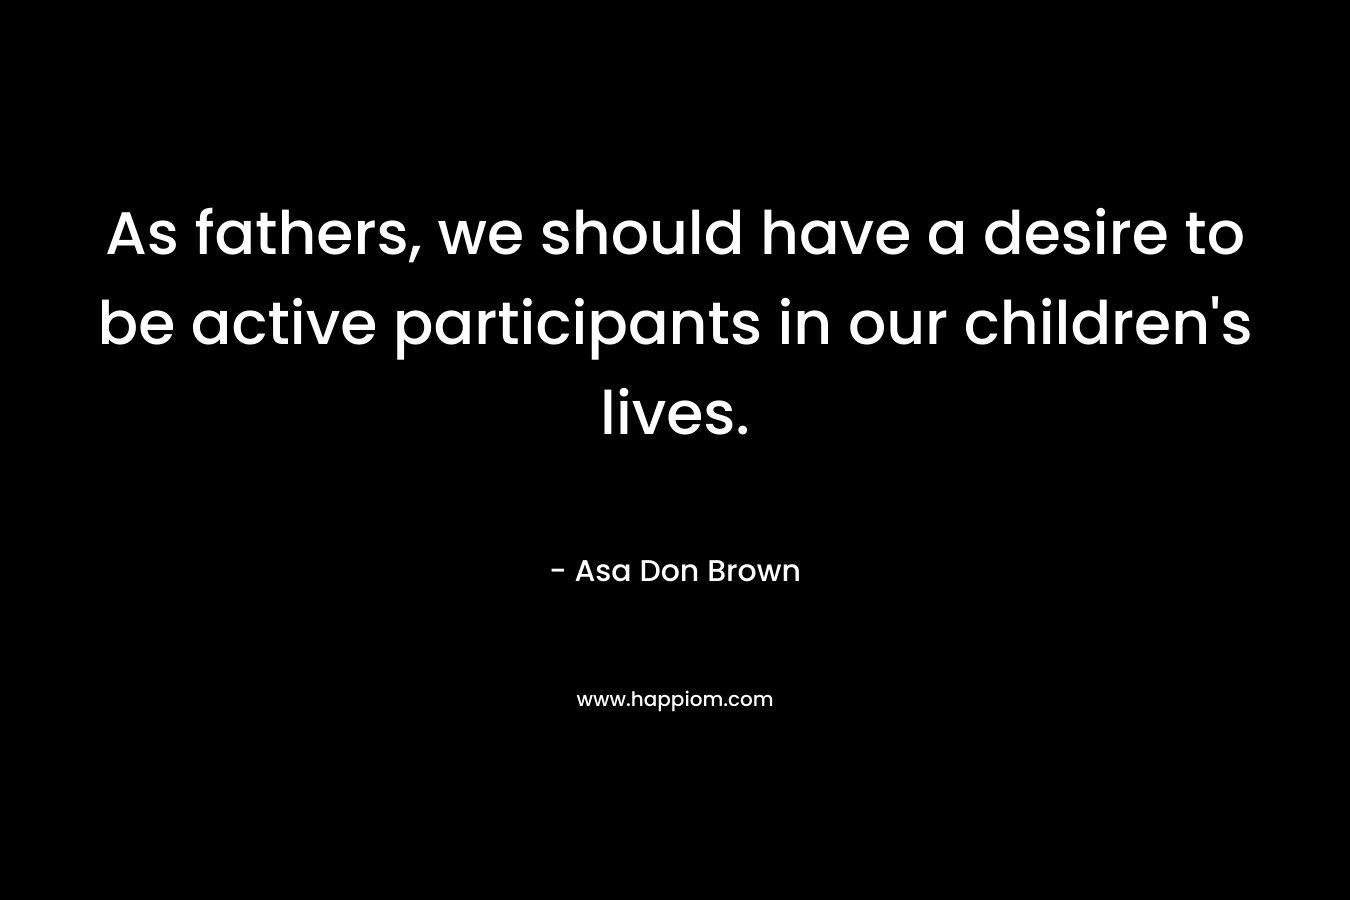 As fathers, we should have a desire to be active participants in our children’s lives. – Asa Don Brown